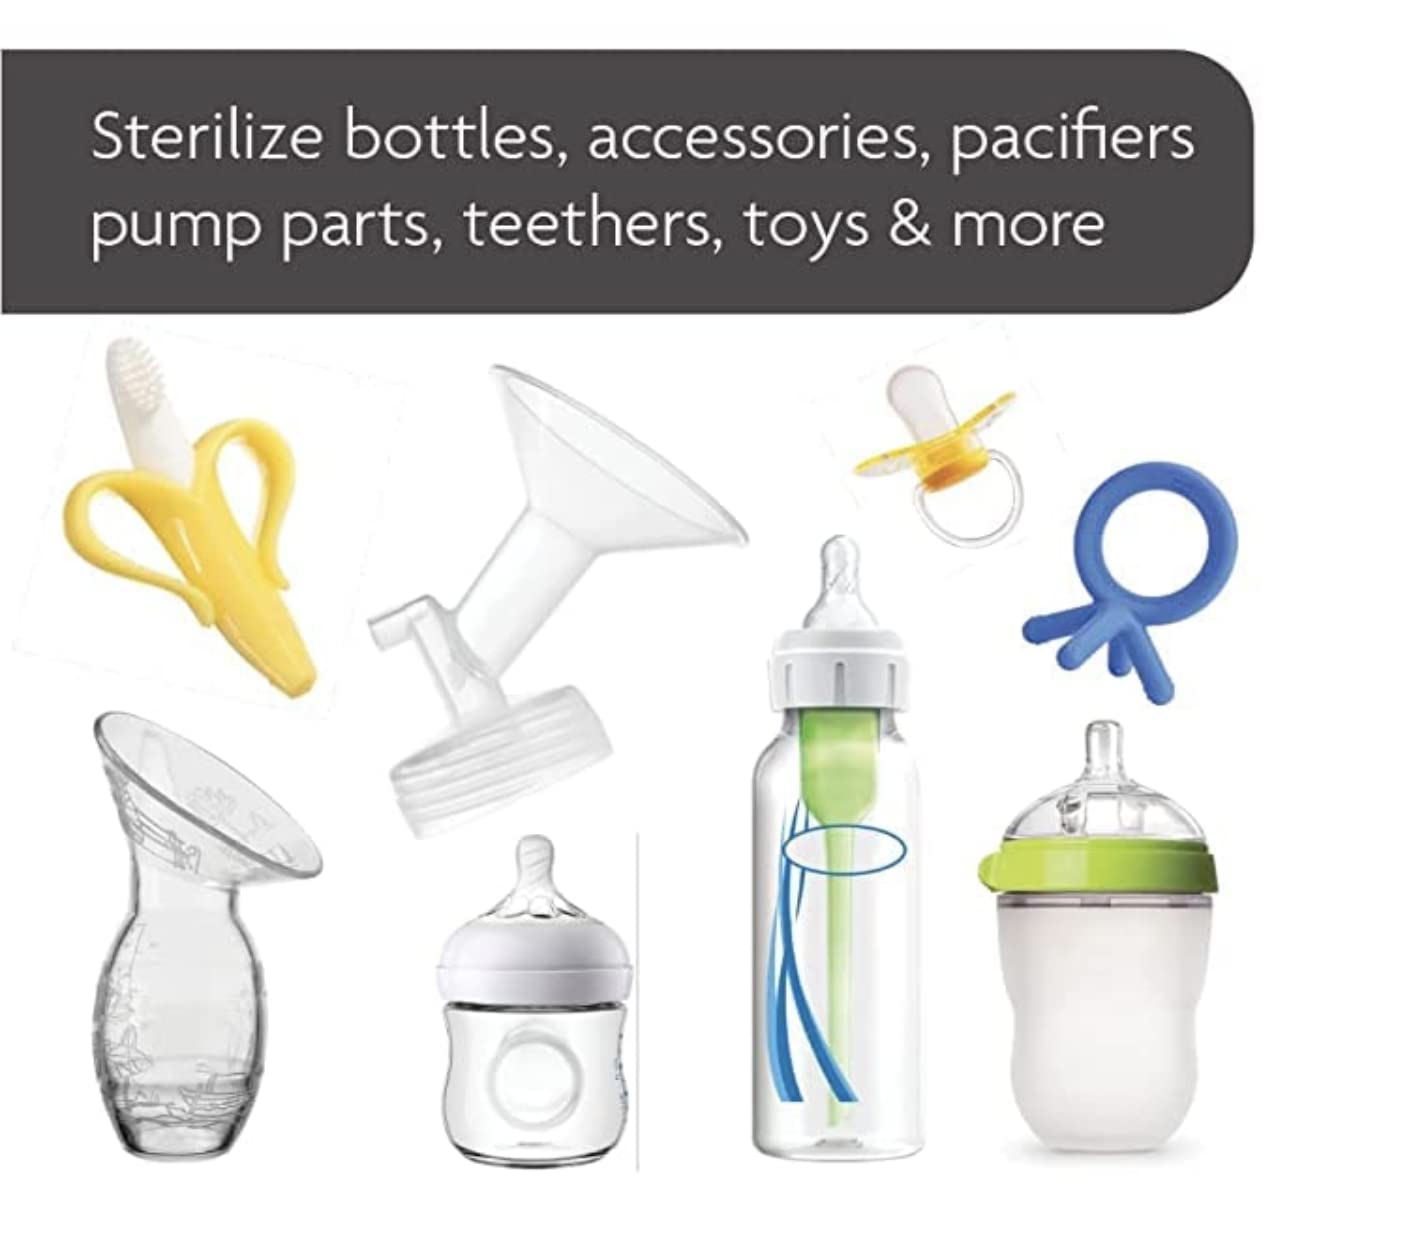 Baby Brezza 4 in 1 Baby Bottle Sterilizer Machine – Largest Capacity Electric Steam Sterilization – Pacifiers, Breast Pump Parts + Universal Sterilizing for All Bottles: Plastic, Glass, Large, Small